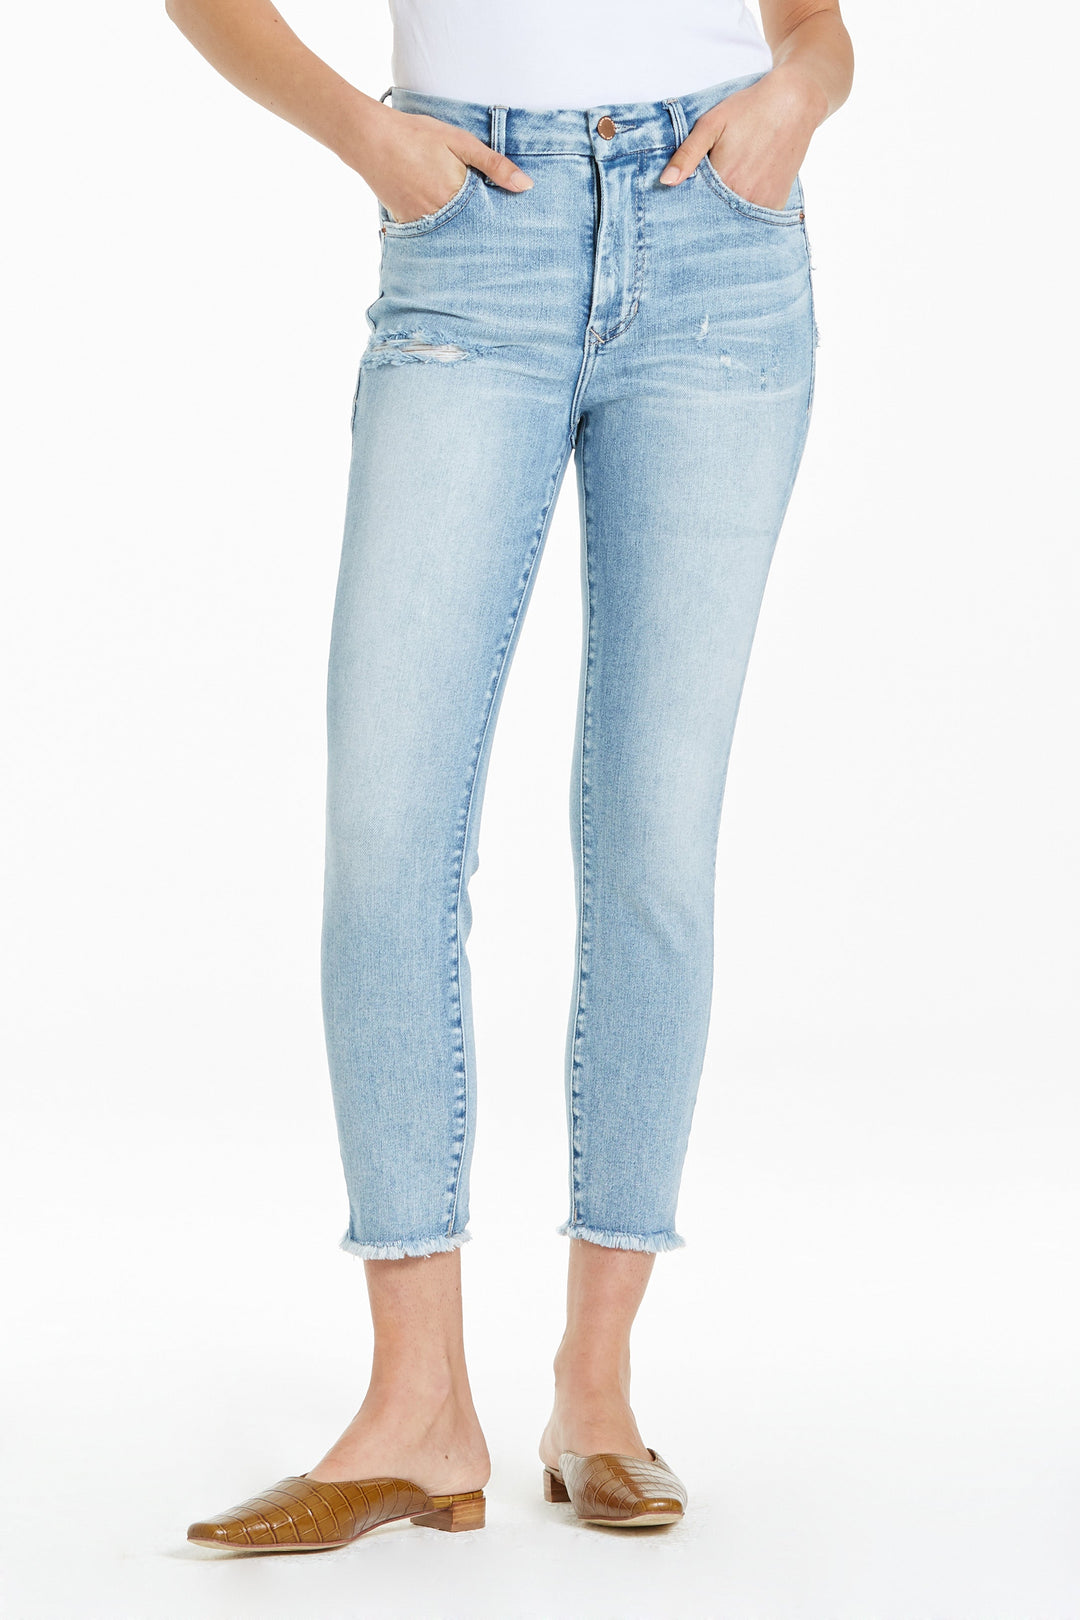 image of a female model wearing a PIXIE HIGH RISE ANKLE CROPPED SKINNY JEANS SANTA CLARA JEANS